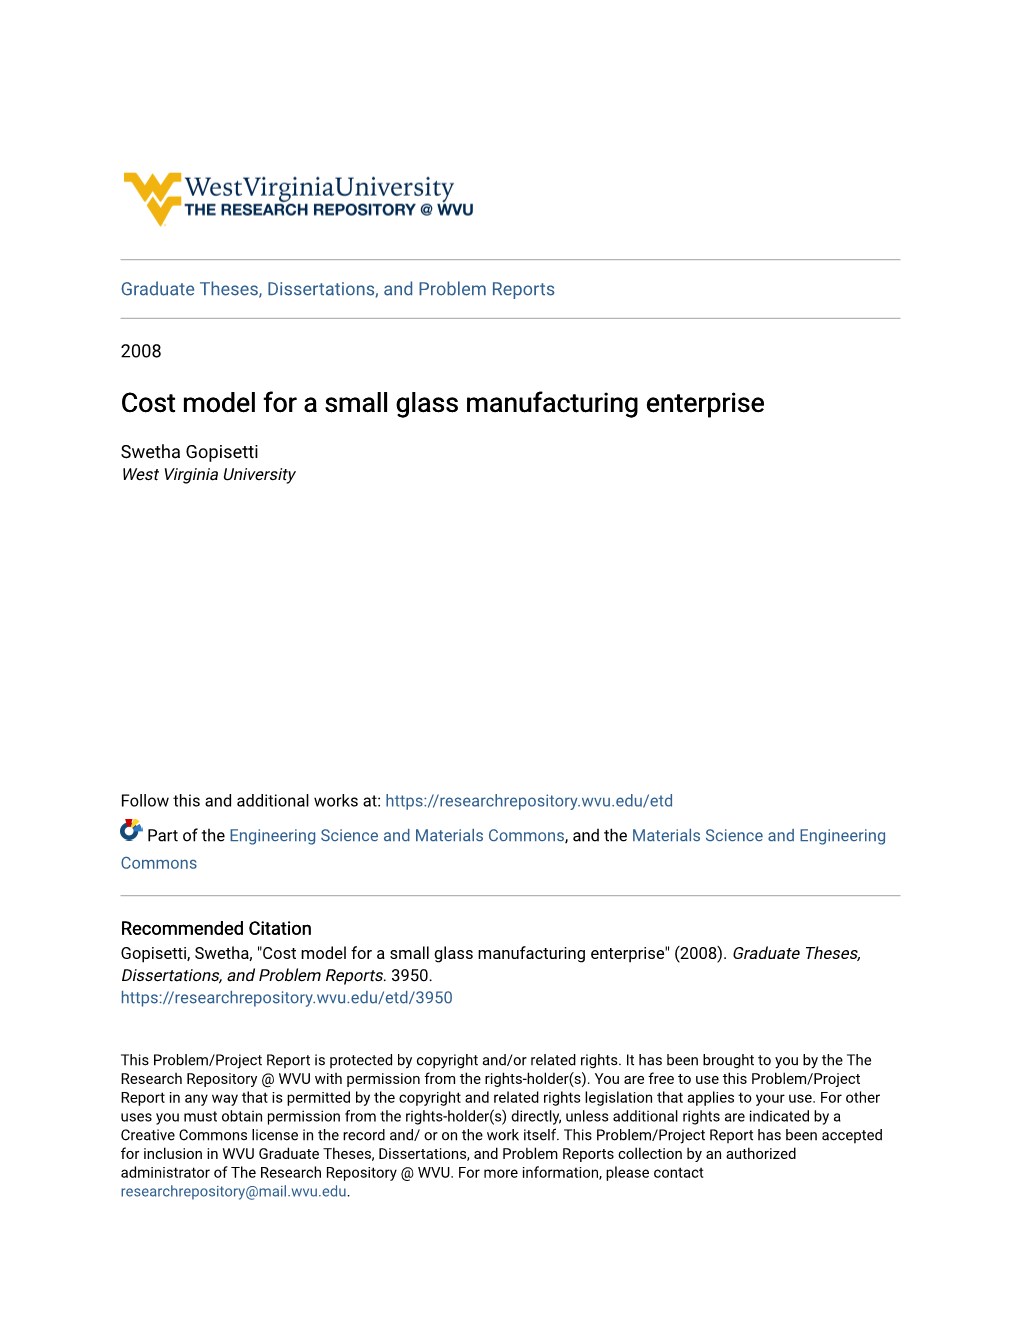 Cost Model for a Small Glass Manufacturing Enterprise